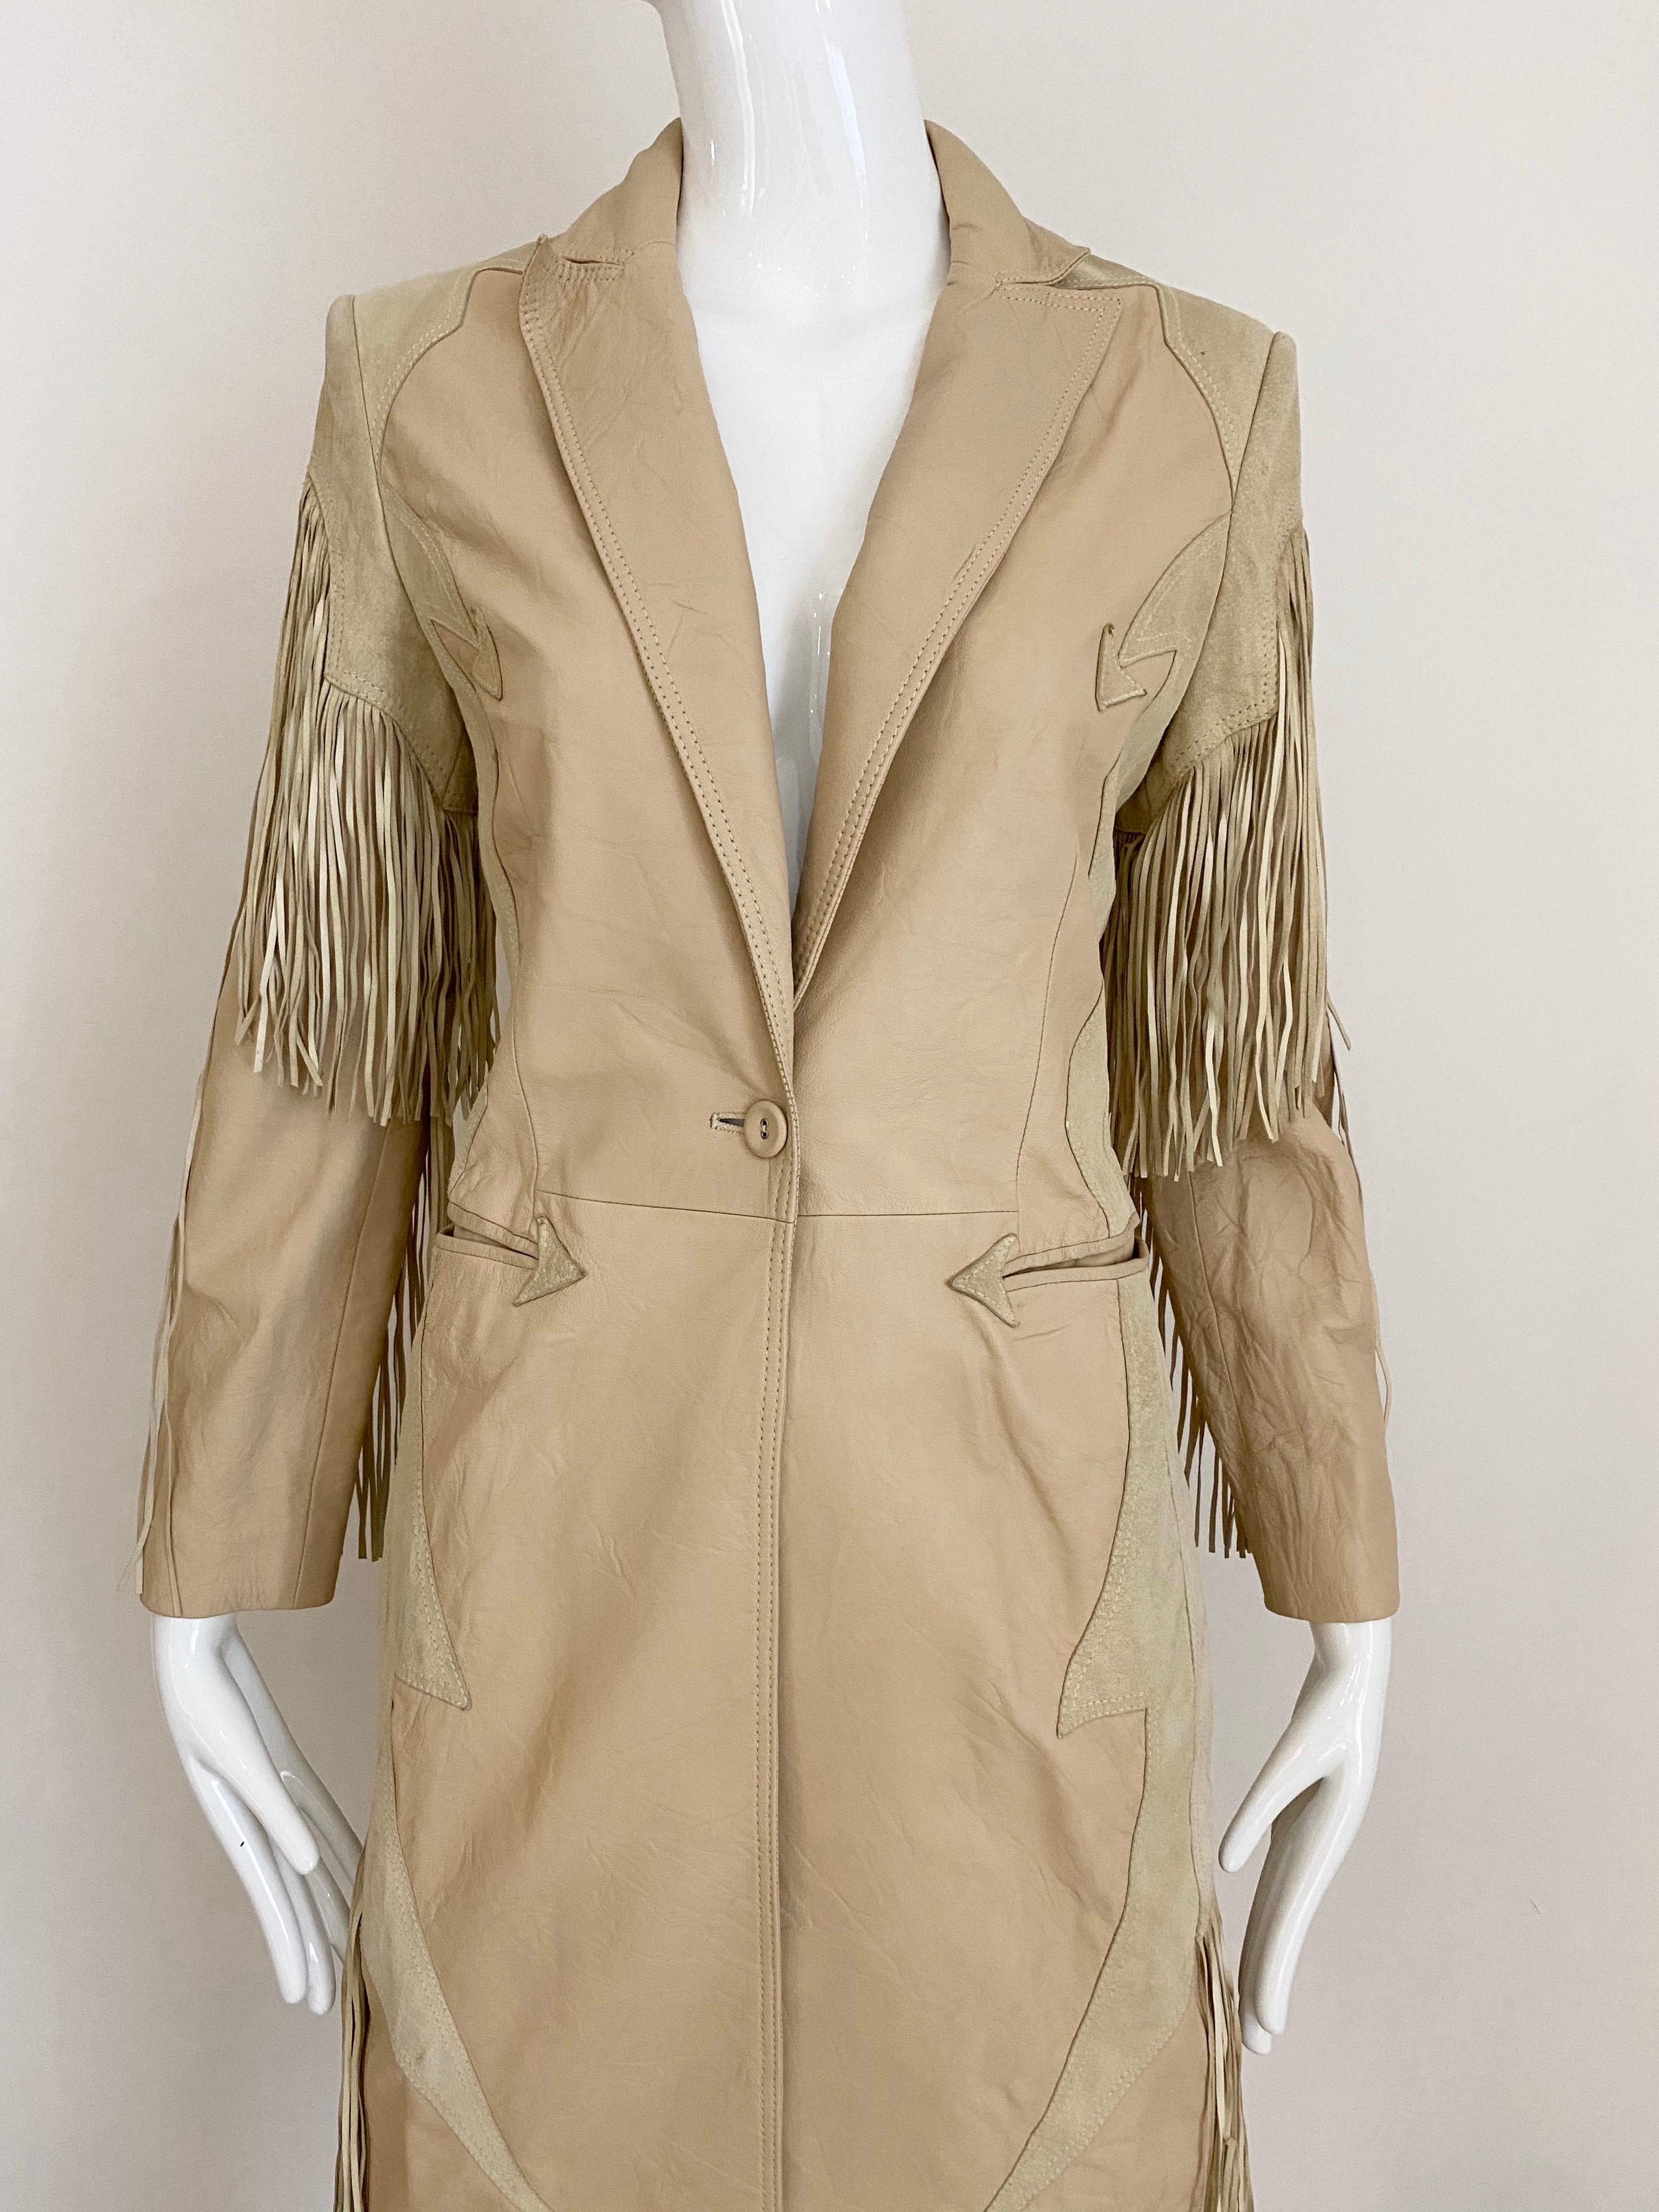 2003 Gianni Versace Tan and cream leather suede fringe coat.
Fit size 2/4
